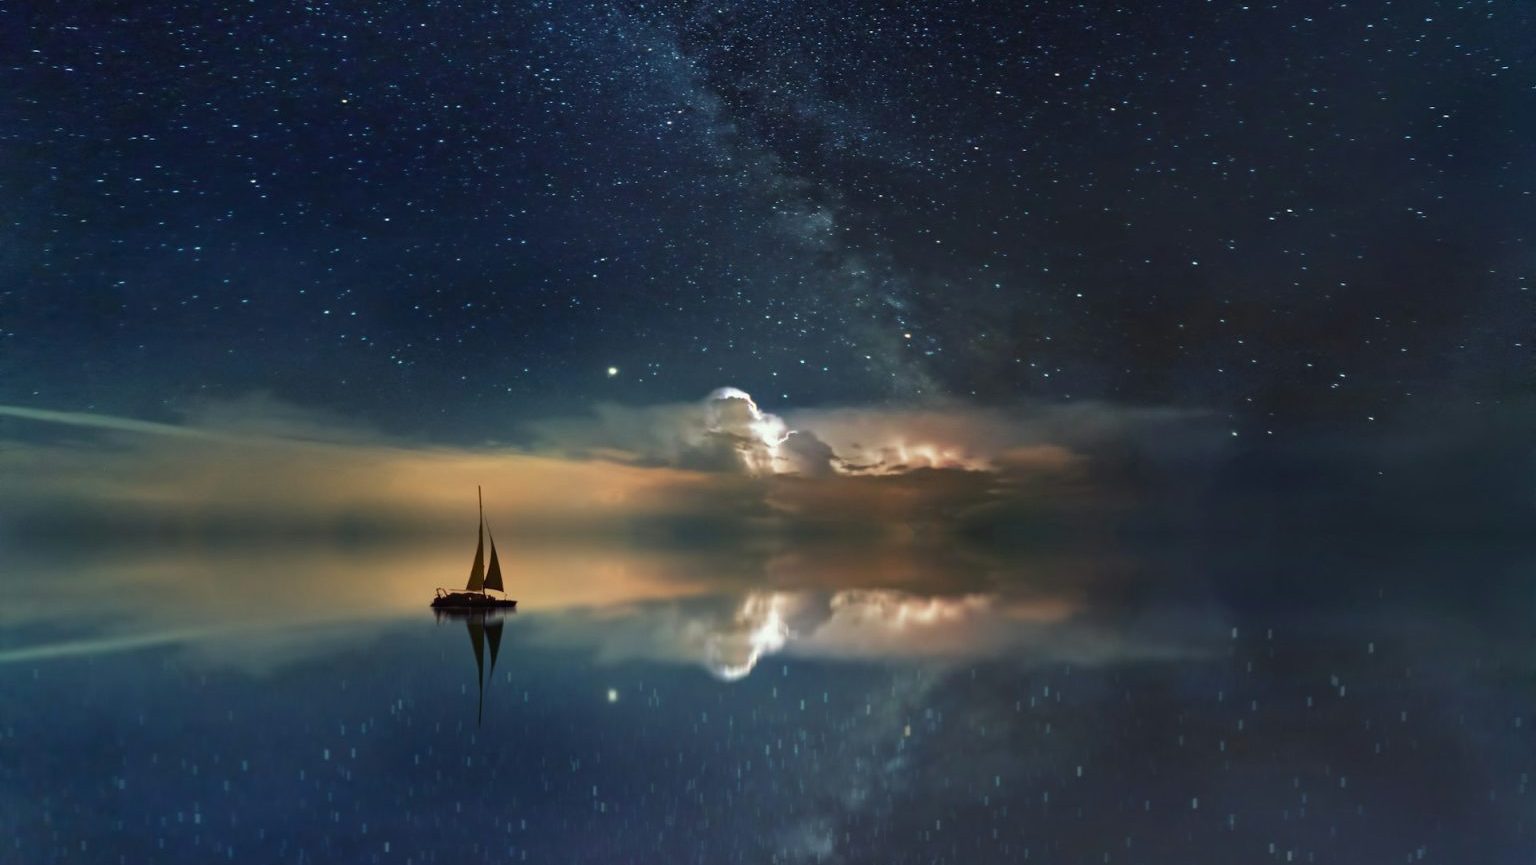 A sailboat on calm waters under a starry night sky with reflections on the surface.